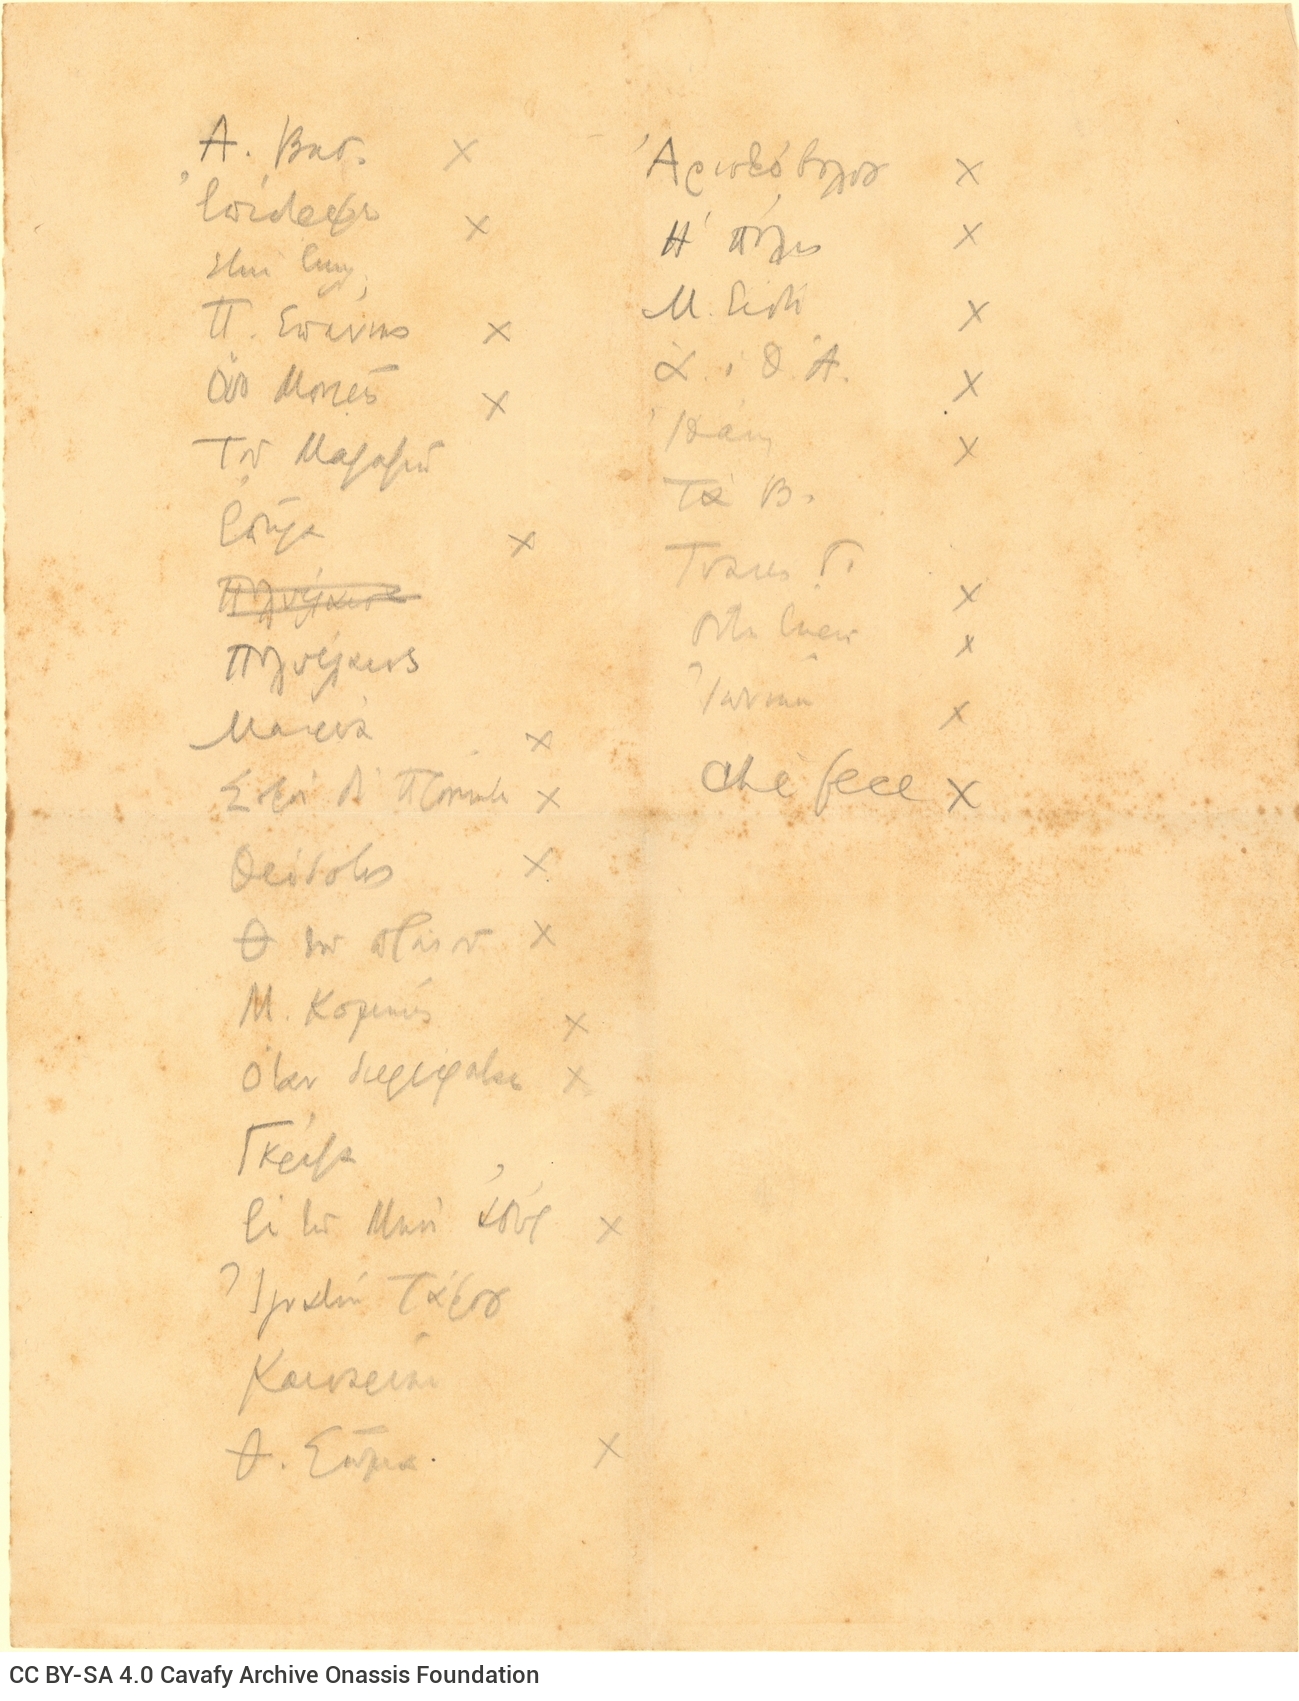 Handwritten notes on one side of a sheet. List of poem titles, many of which are recorded in abbreviated form.